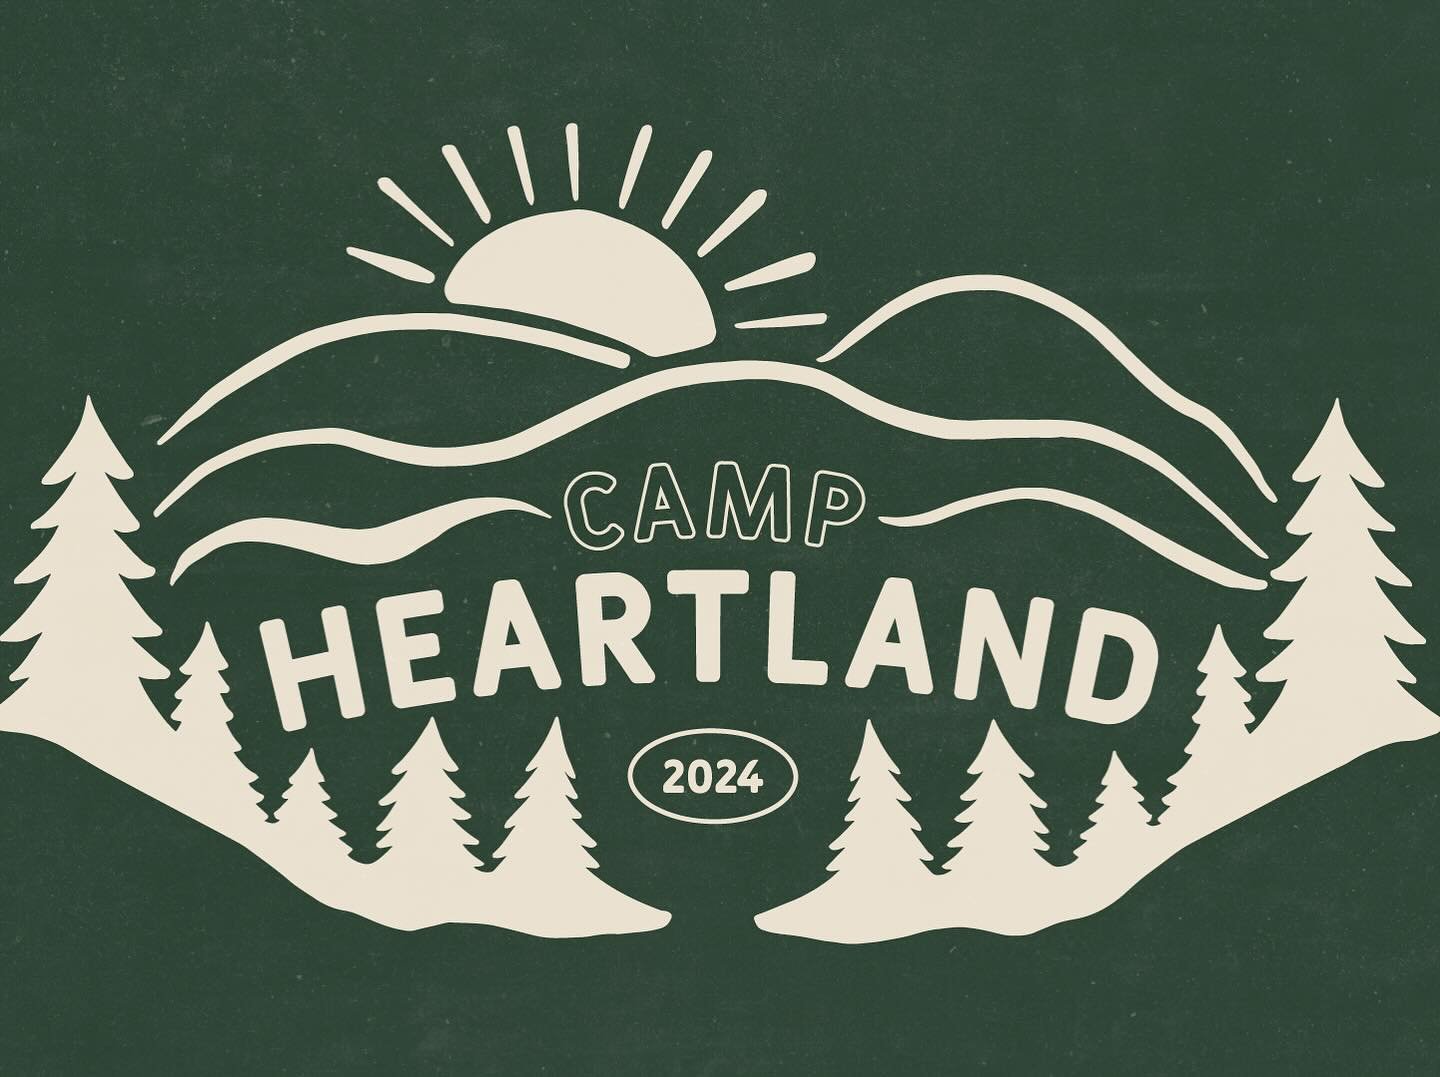 One week left to register for Student Camp 2024!

All middle and high school students are invited to join us May 29-June 2 for Camp Heartland!

Camp is for all incoming 6th grade students through recently graduated Seniors, meaning students currently